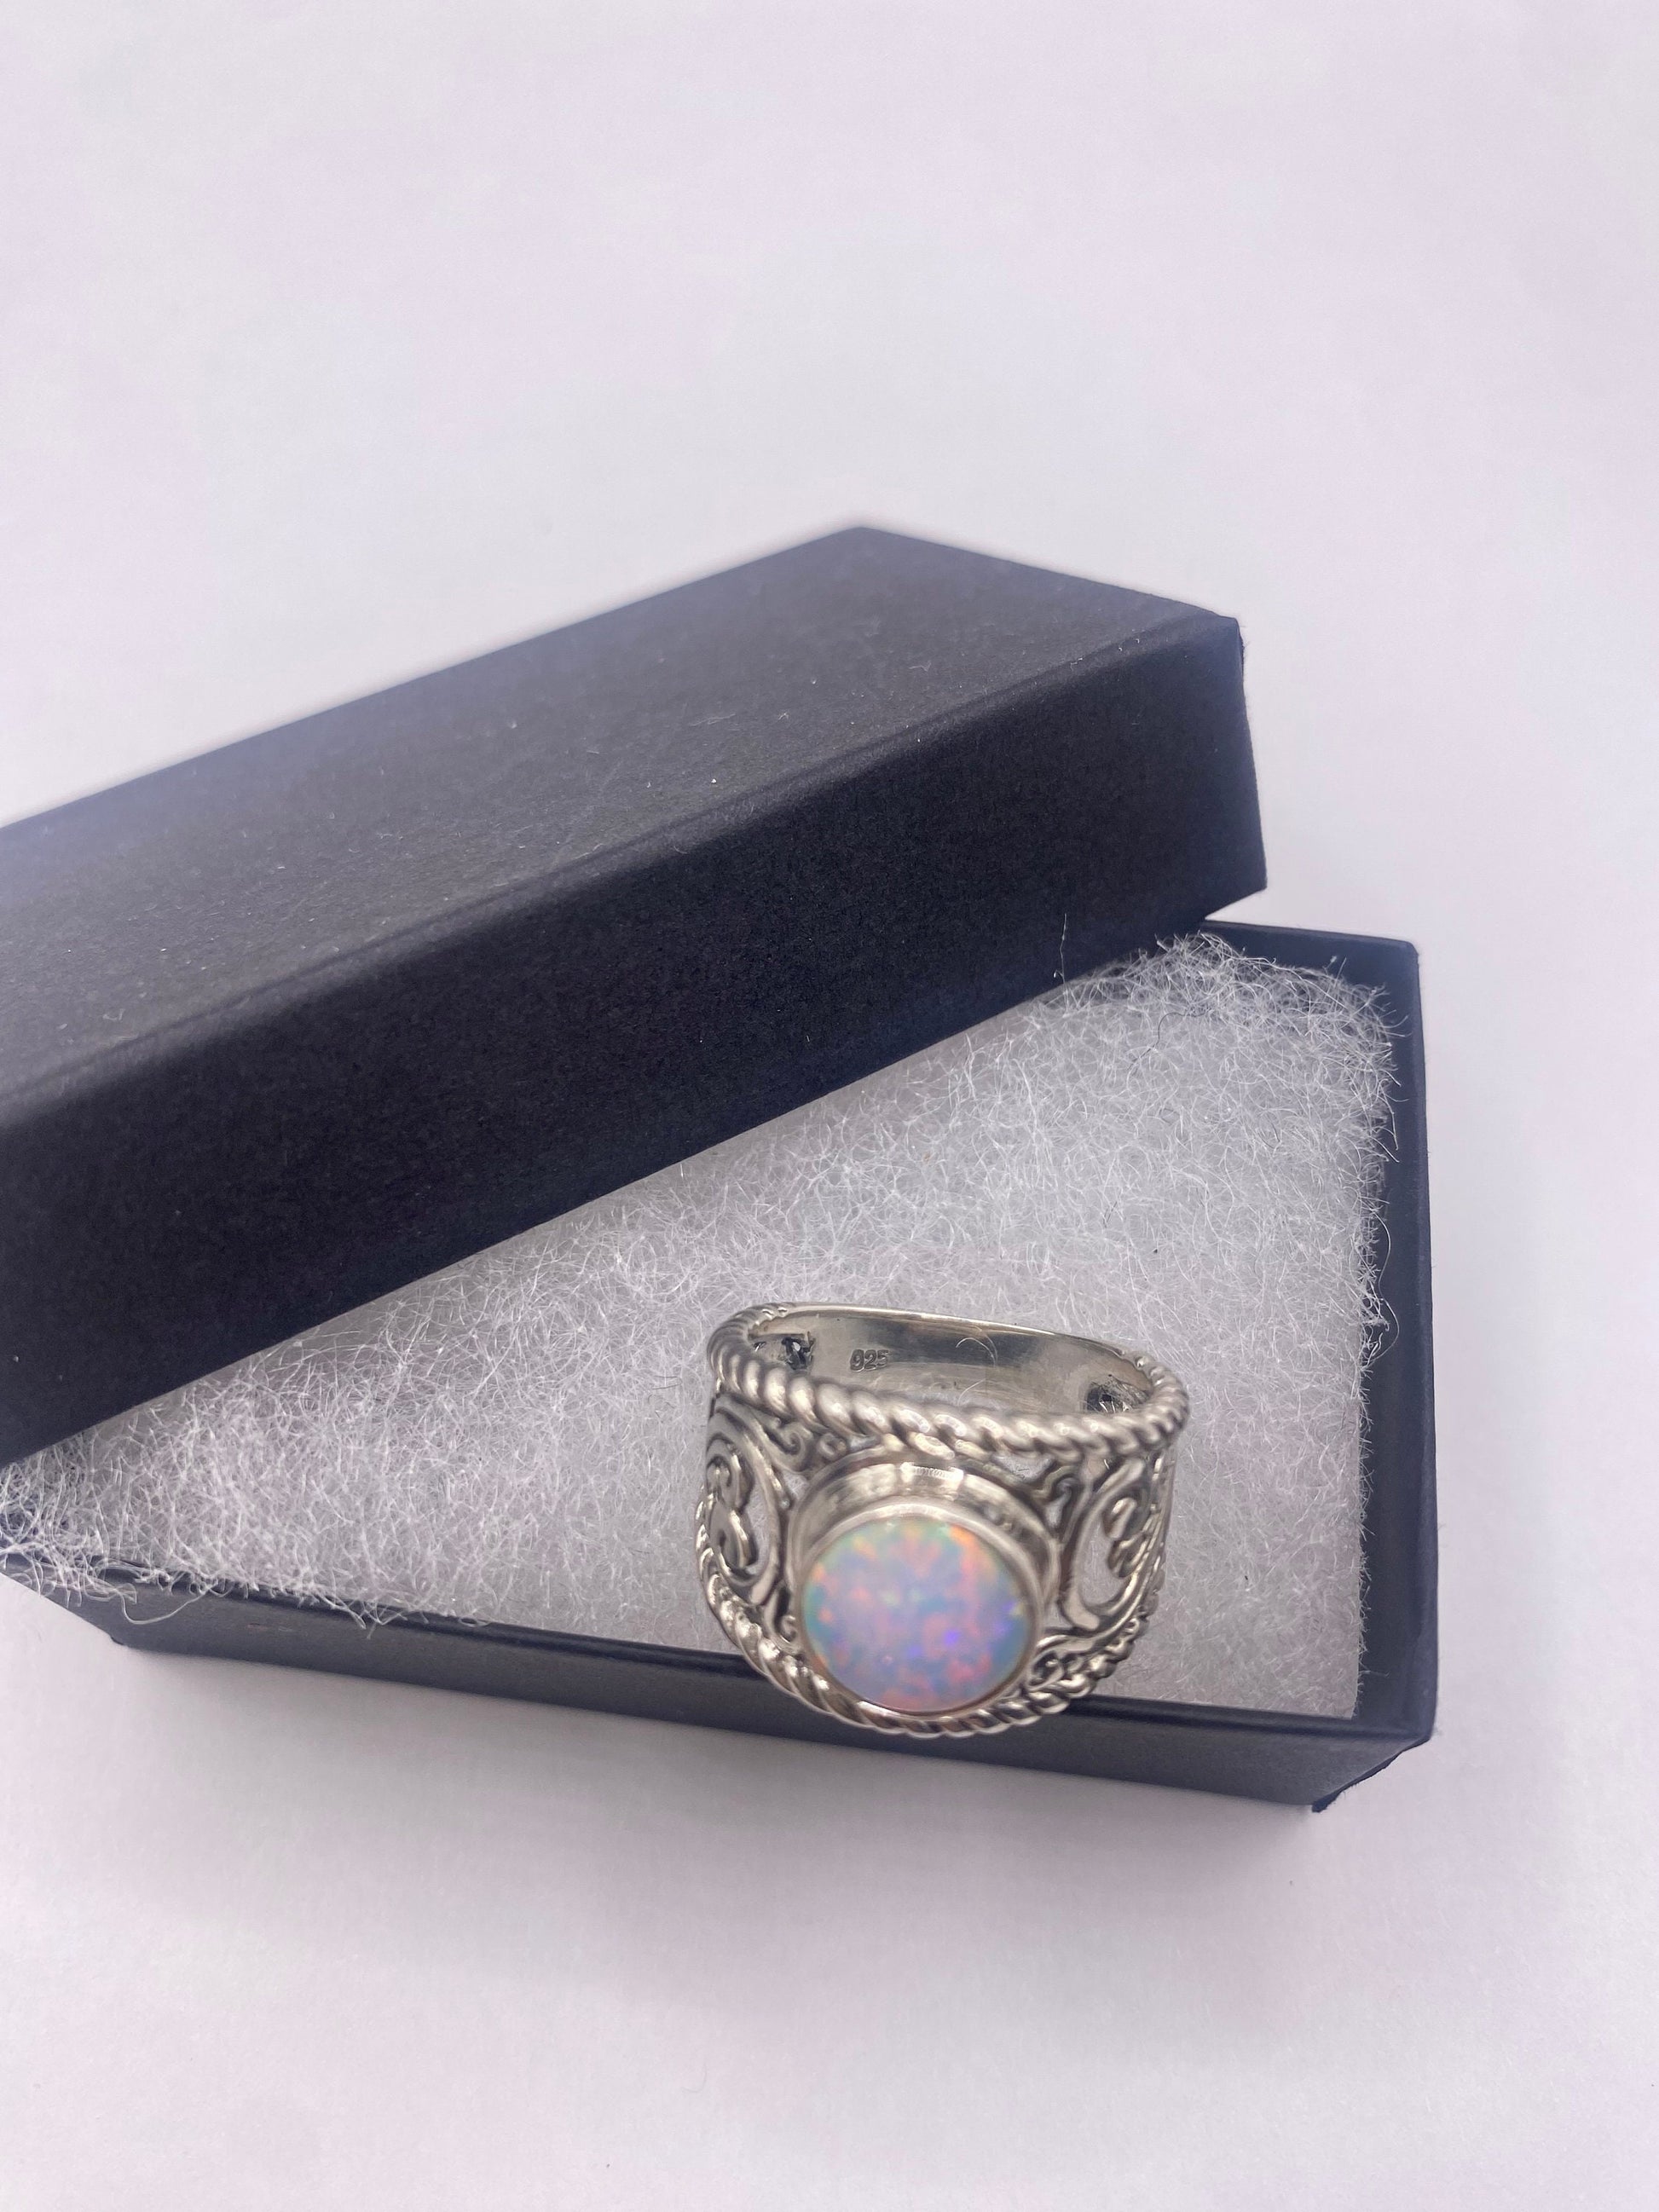 Vintage Fire Opal Ring 925 Sterling Silver Cocktail Band